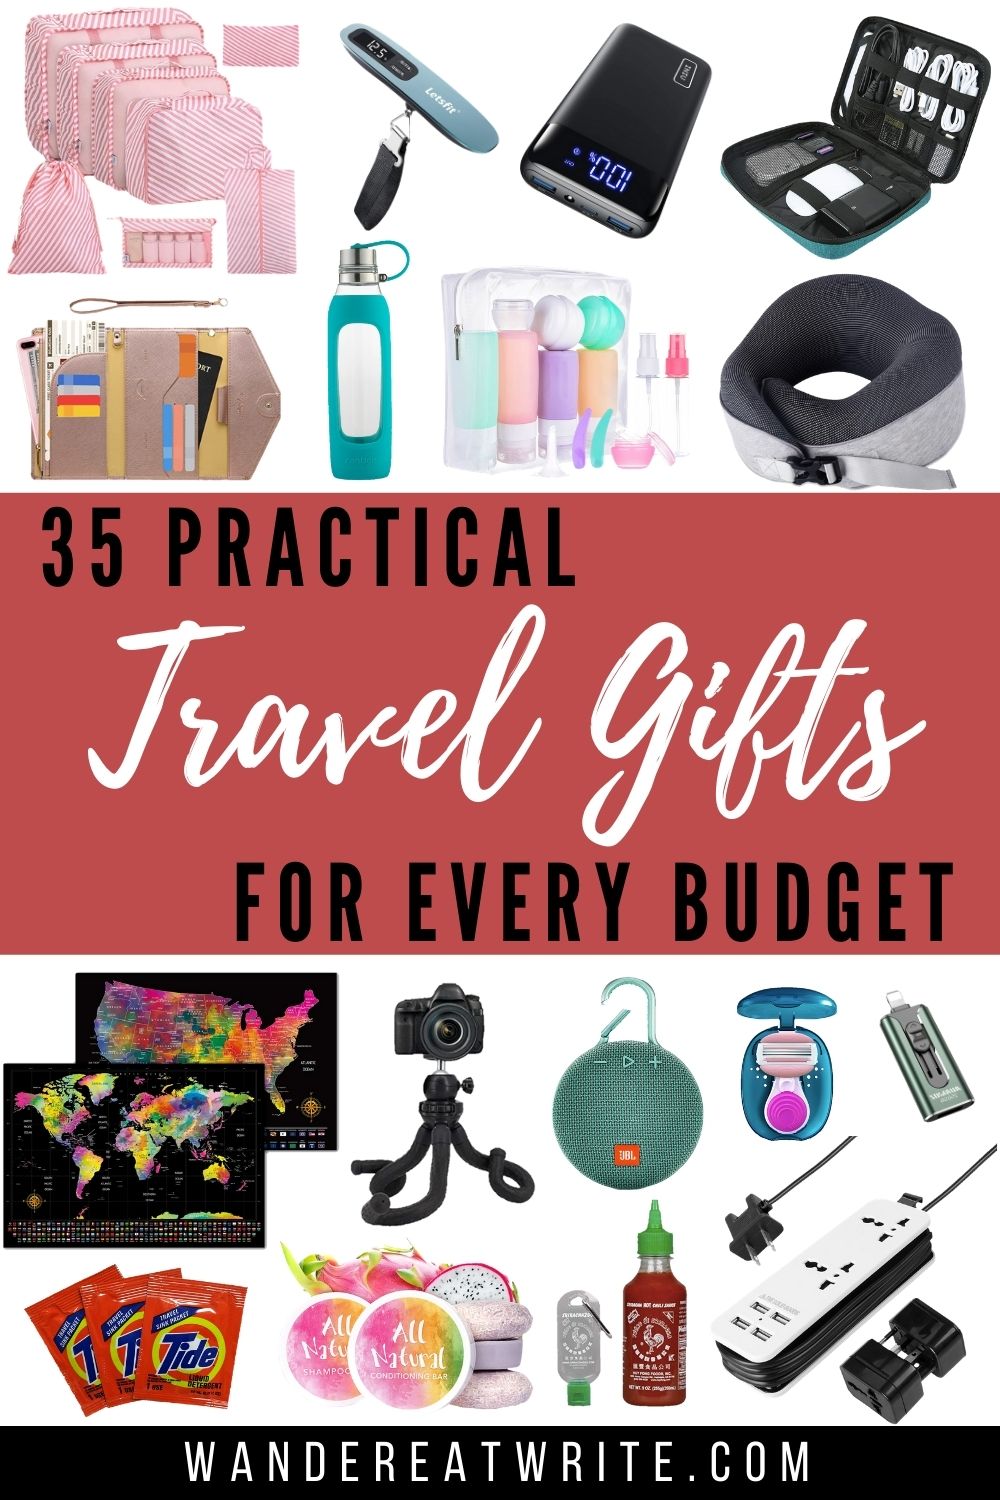 16 Travel Gift Ideas Made in Canada | #ExperienceTransat